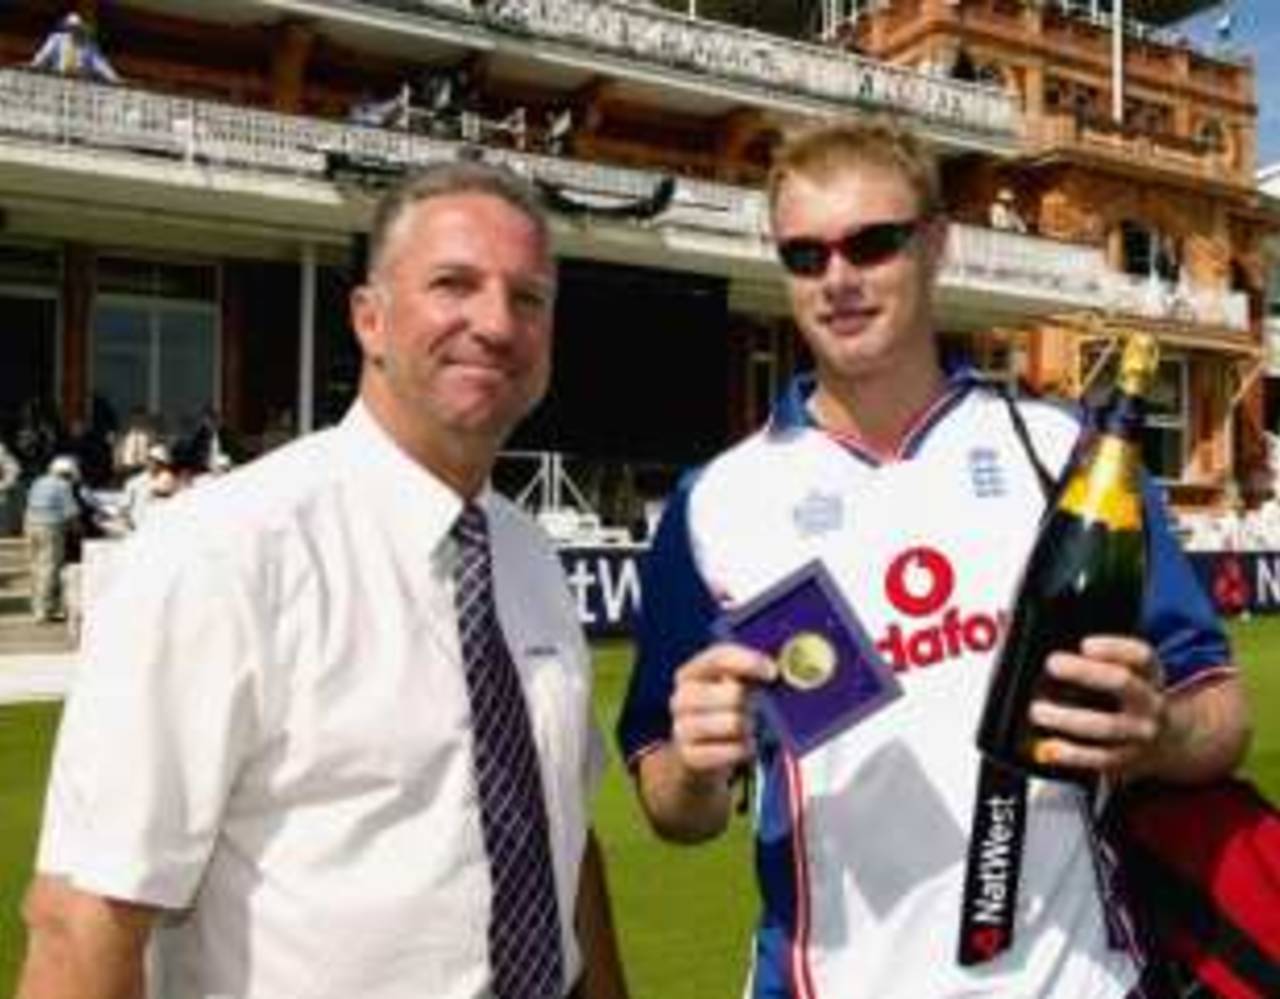 Ian Botham presents Andrew Flintoff with his Man-of-the-Match award, England v  South Africa, NatWest Series final, Lords. 12 July 2003
NULL